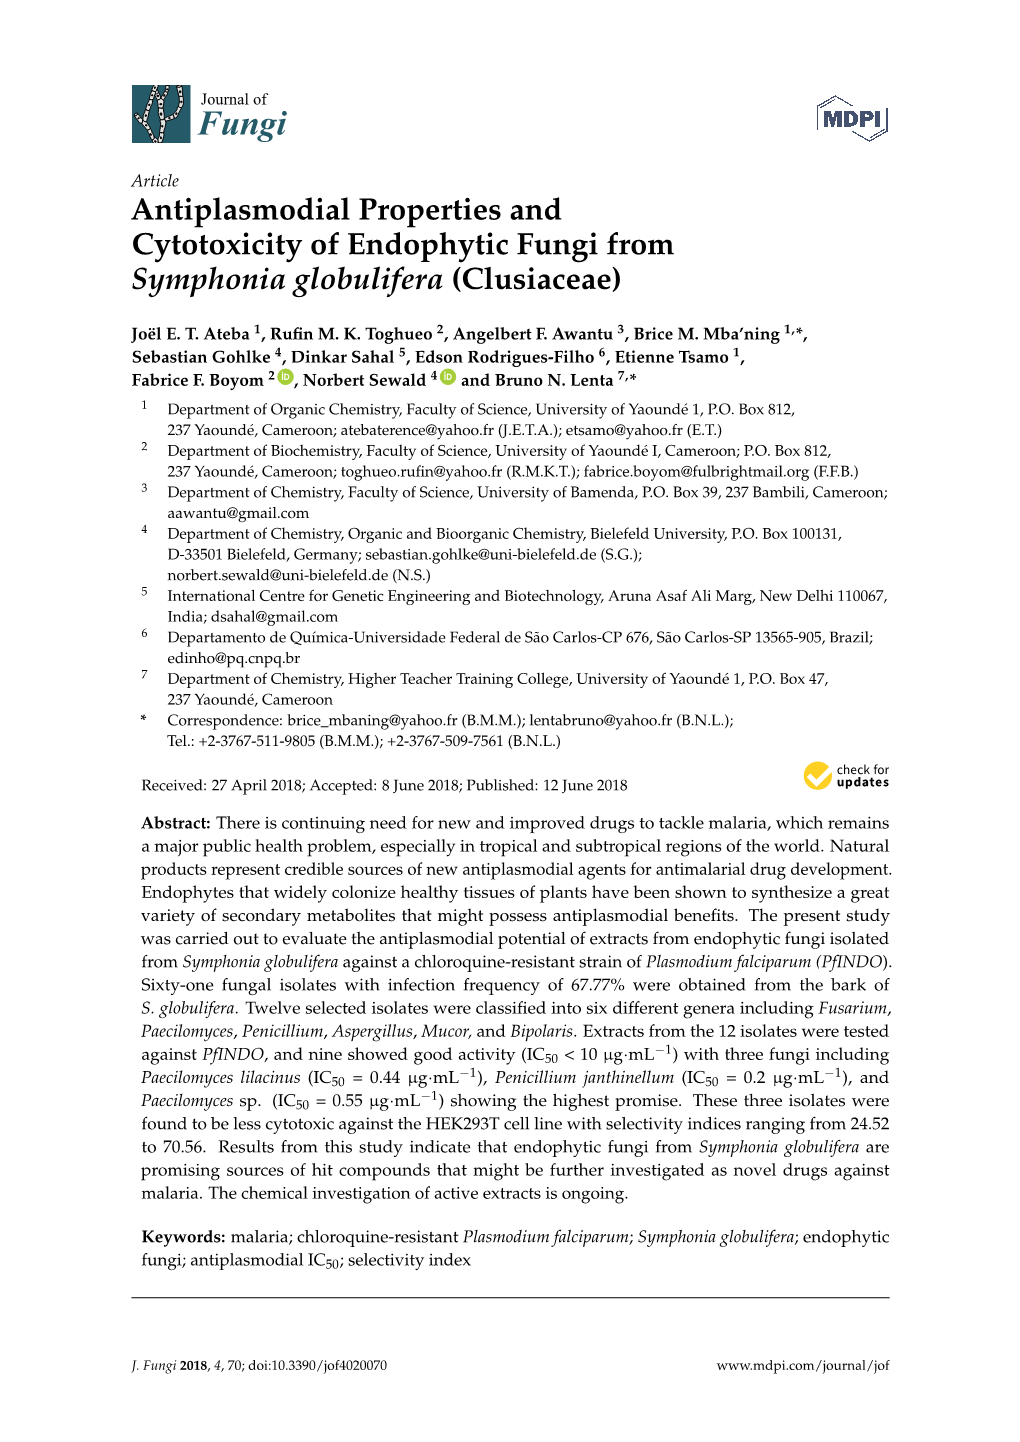 Antiplasmodial Properties and Cytotoxicity of Endophytic Fungi from Symphonia Globulifera (Clusiaceae)